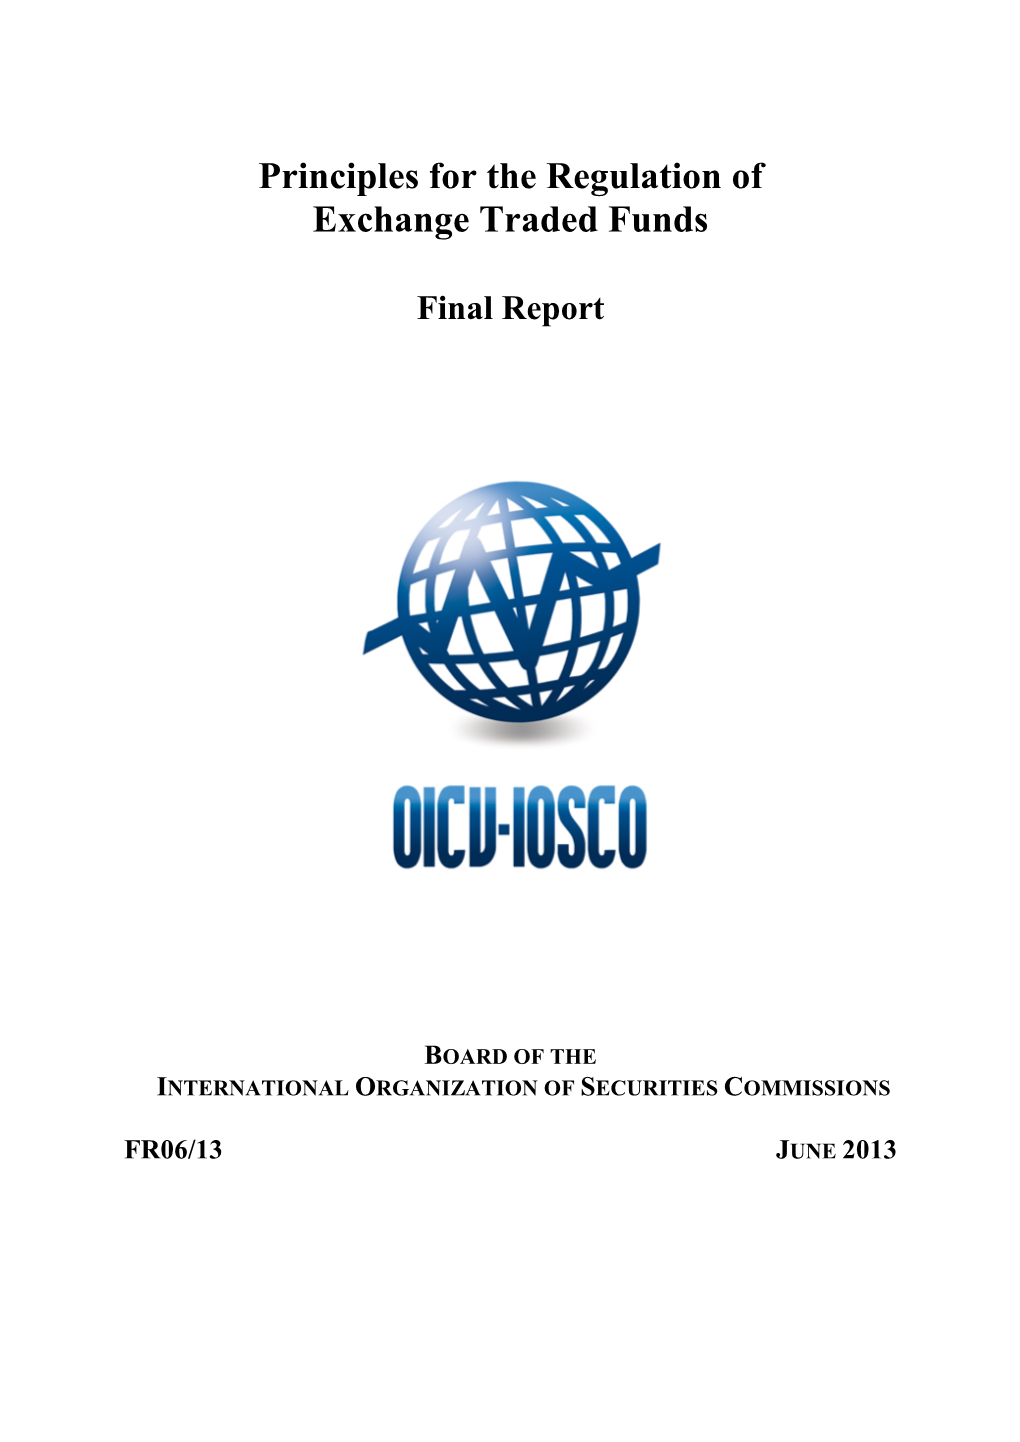 Principles for the Regulation of Exchange Traded Funds